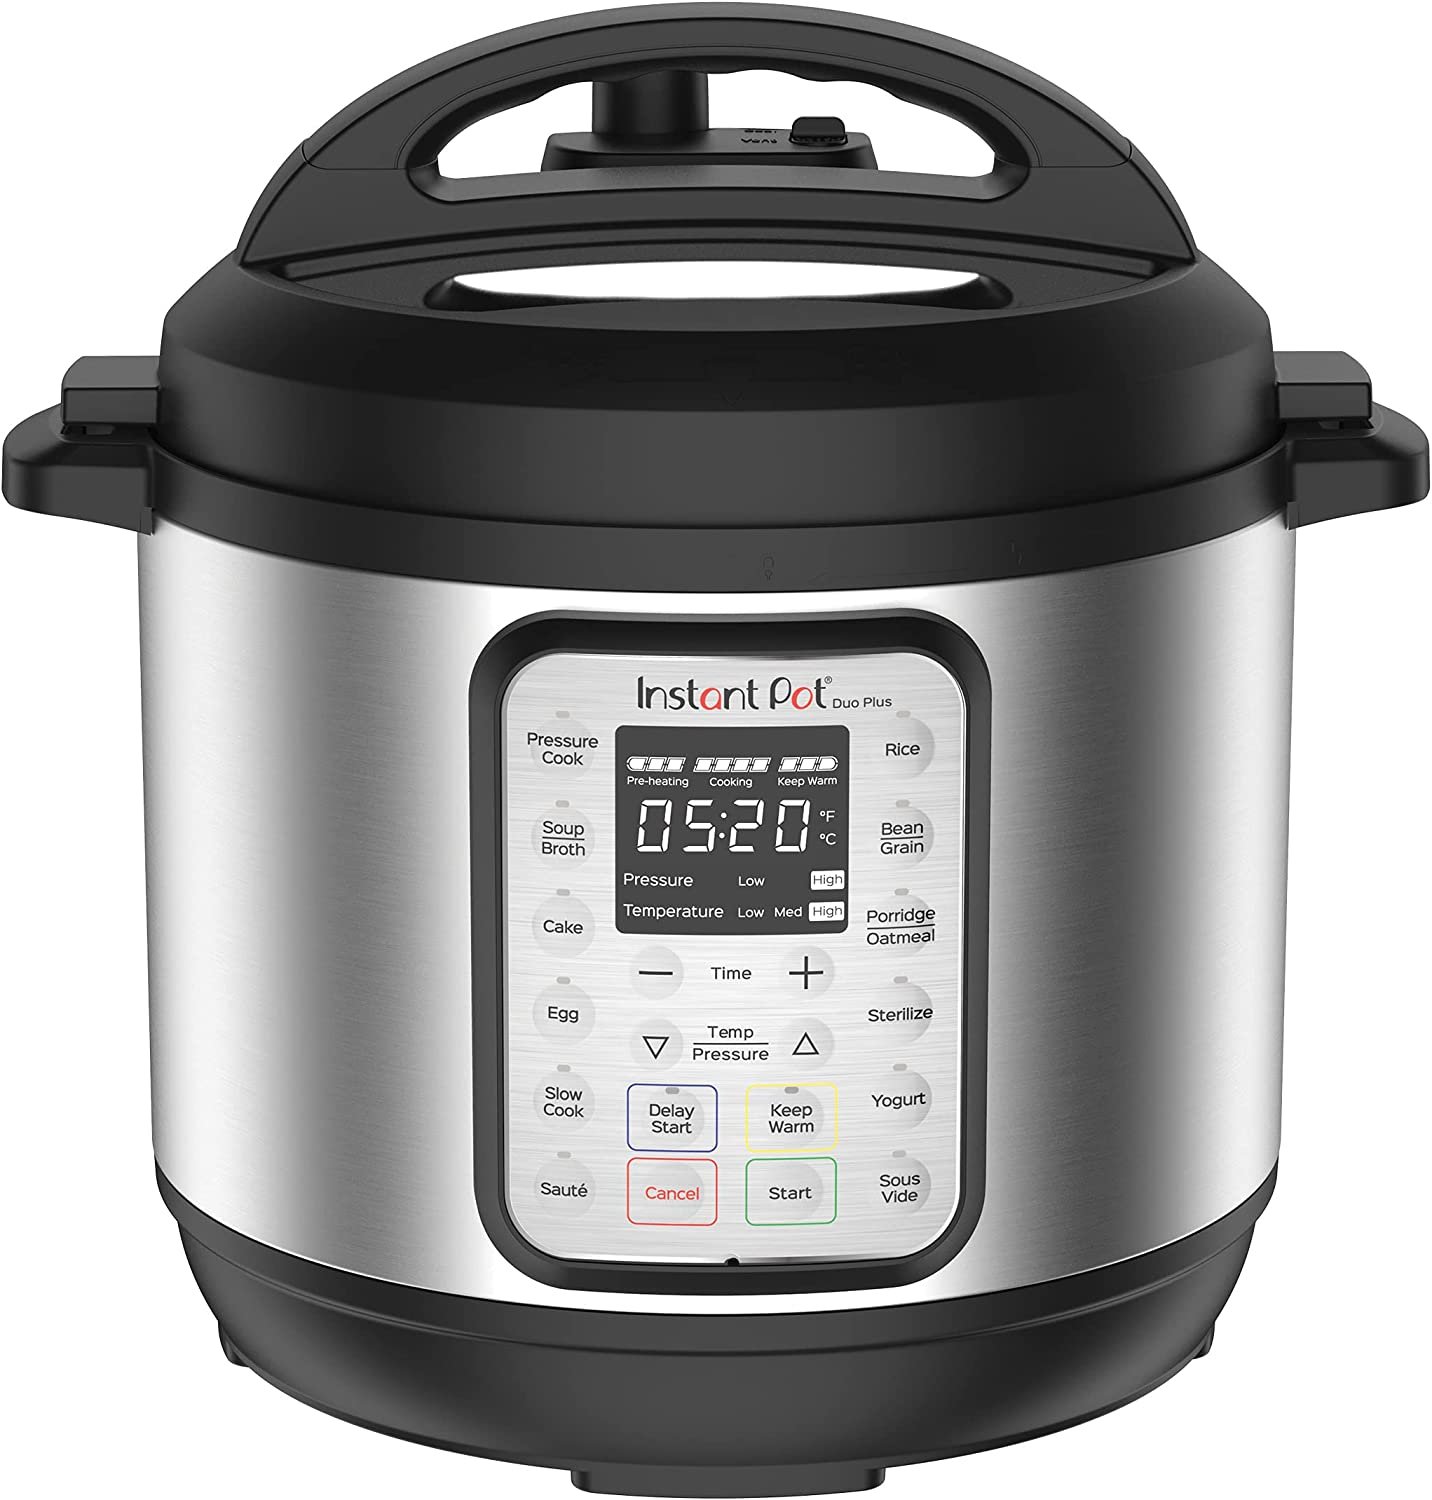 Courant 1.6 qt. Black Mini Slow Cooker with 3-Cooking Settings